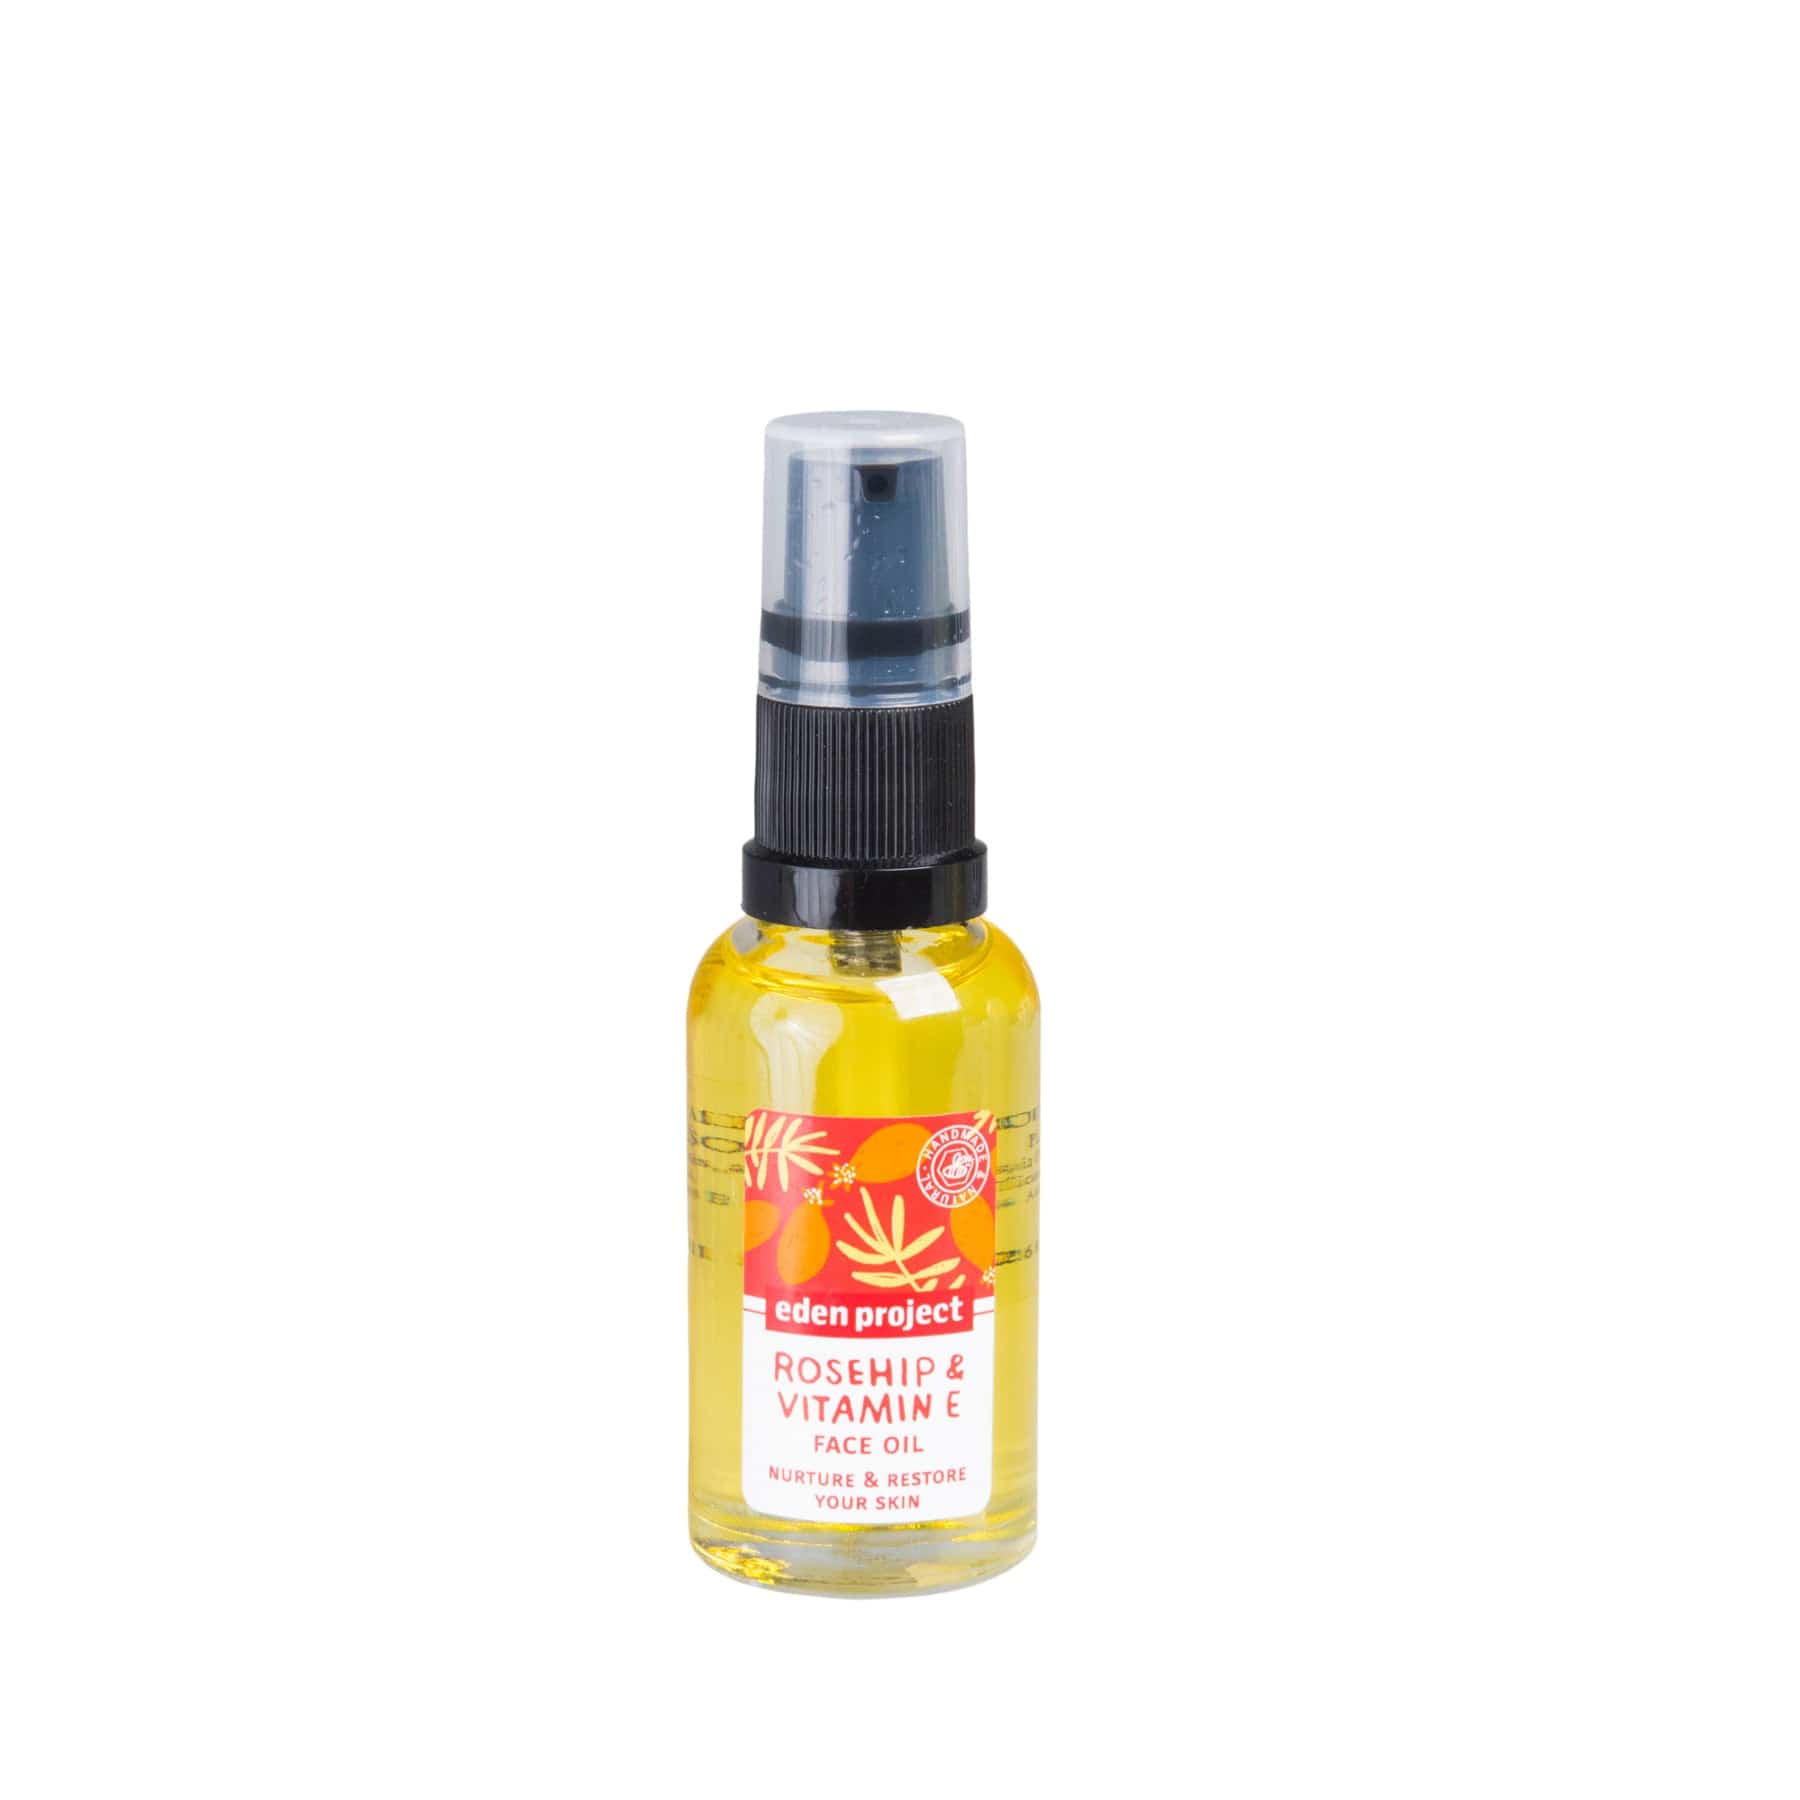 Eden Project Rosehip & Vitamin E face oil bottle with spray nozzle, natural skincare product, nurture and restore your skin, isolated on white background.